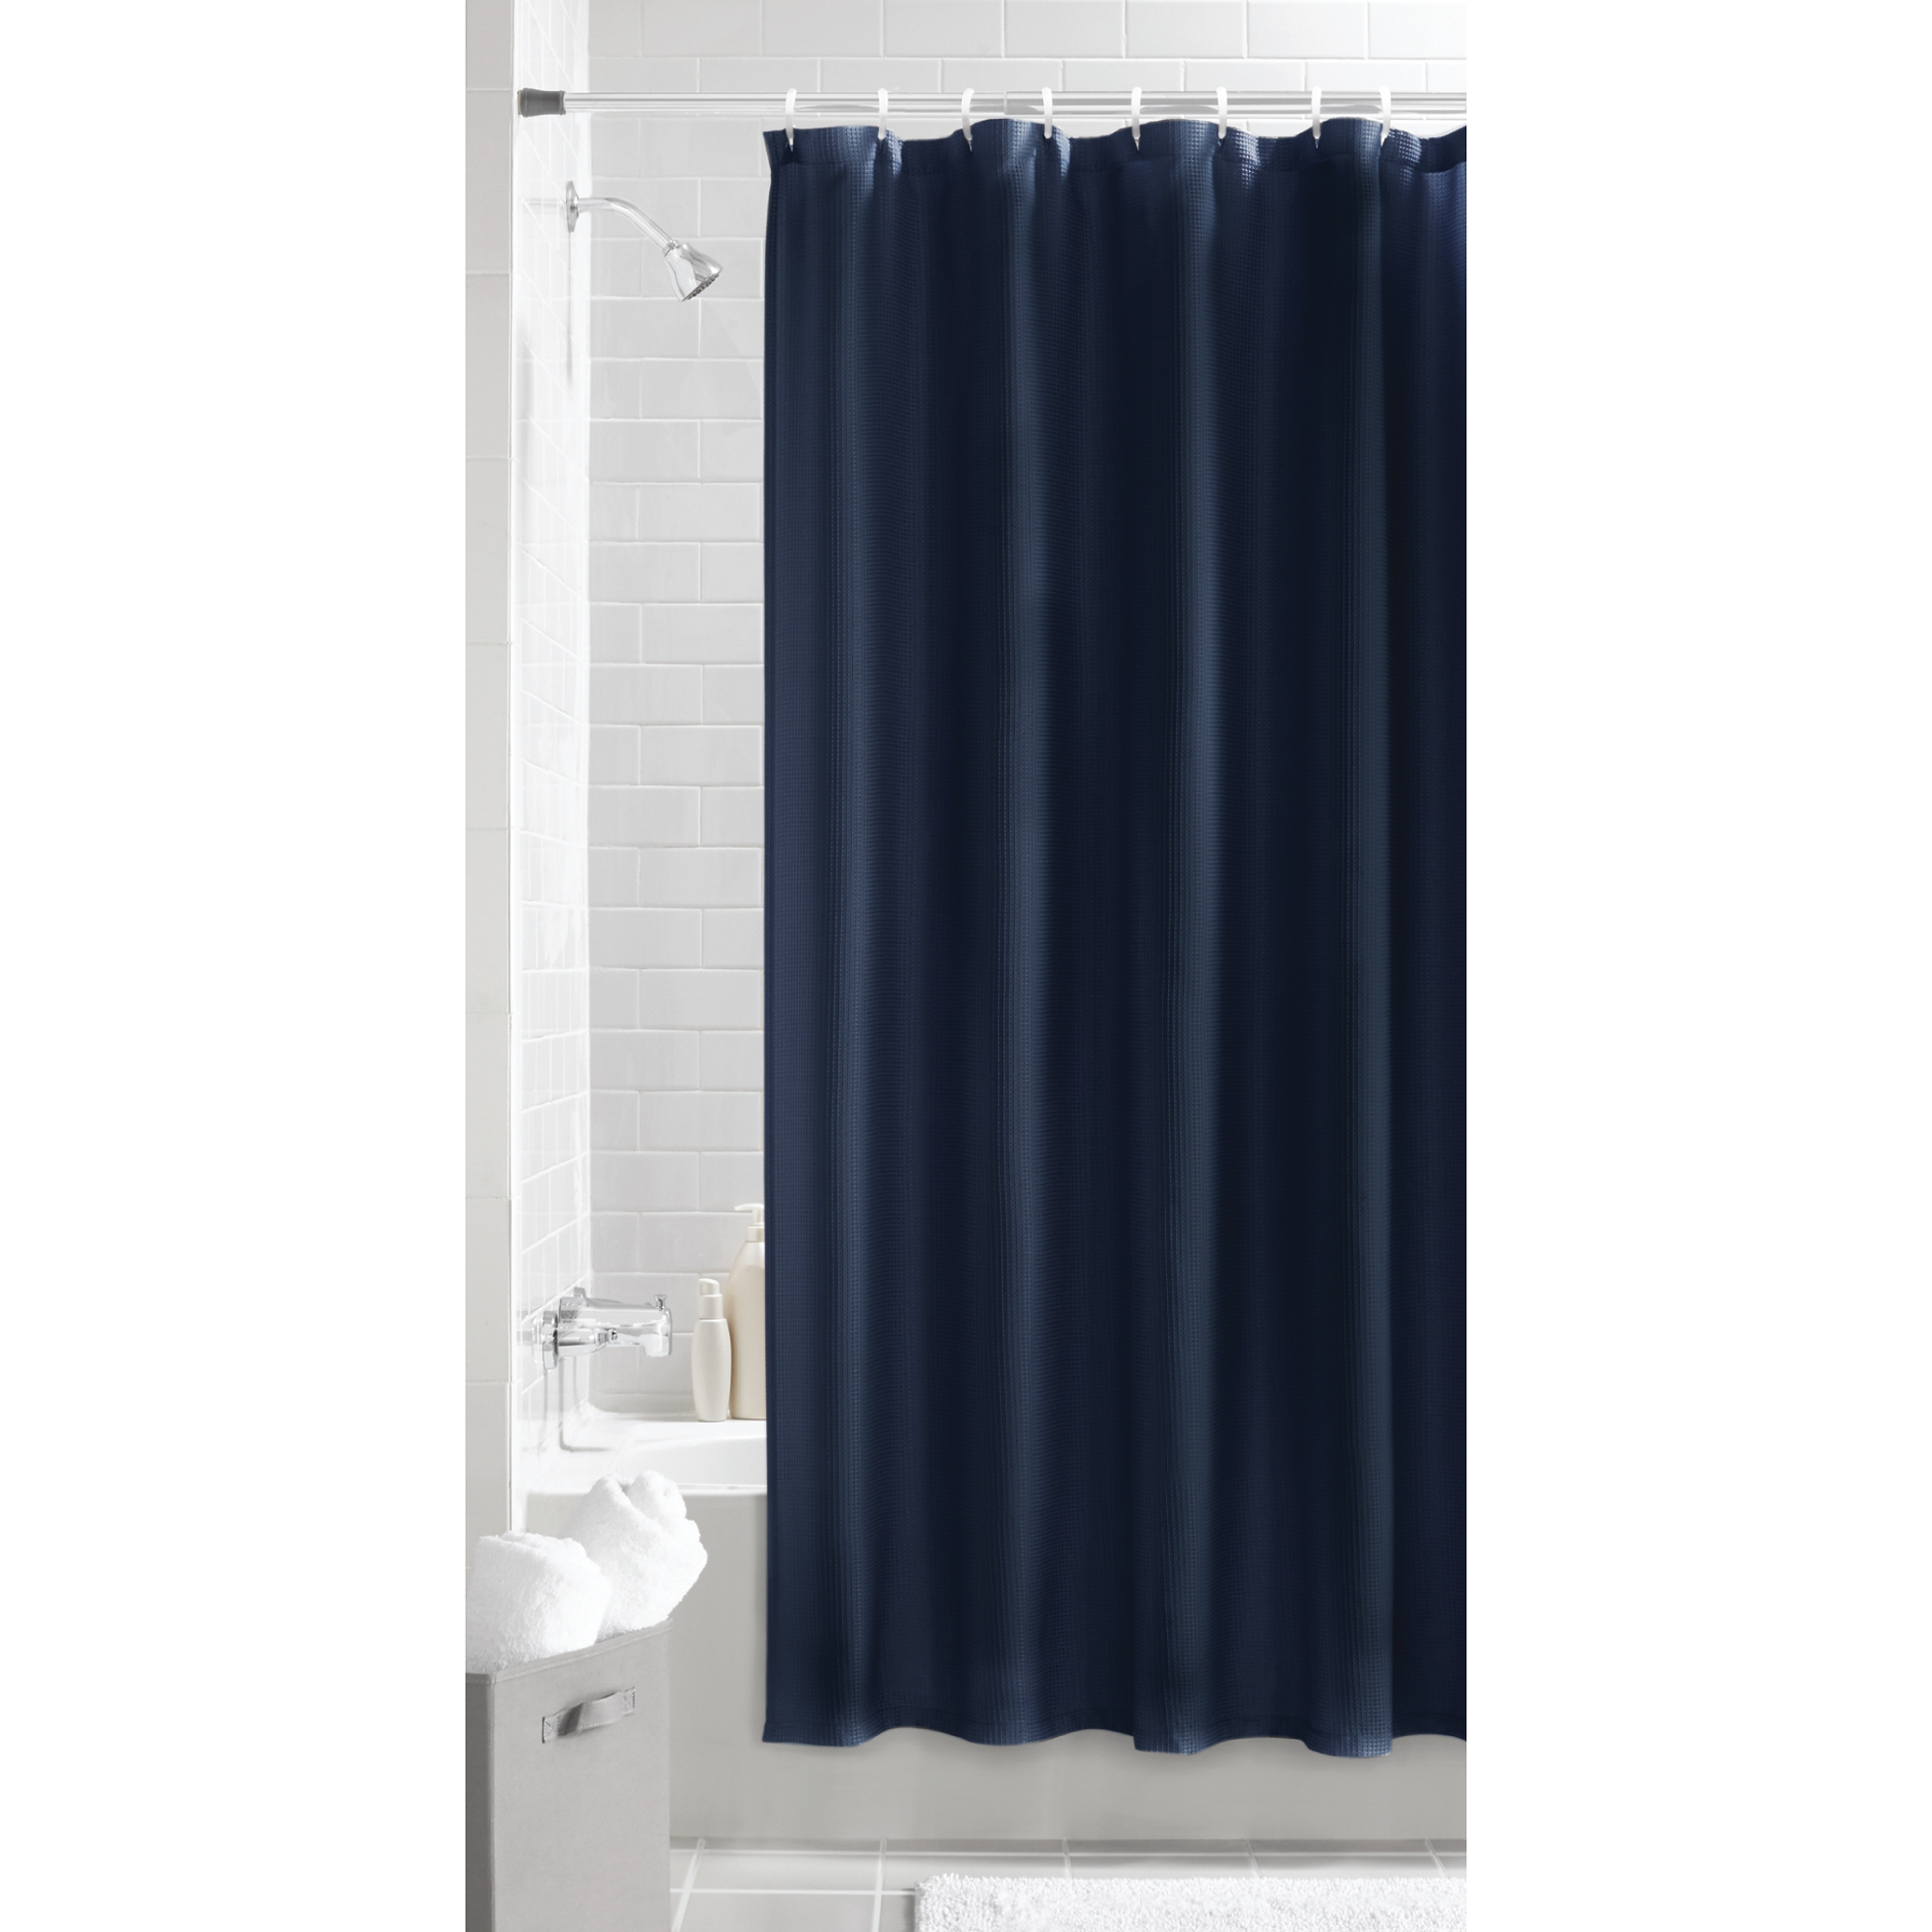 Navy Blue Fabric Shower Curtain, 70" x 72", Mainstays Classic Waffle Weave Pattern - image 1 of 5